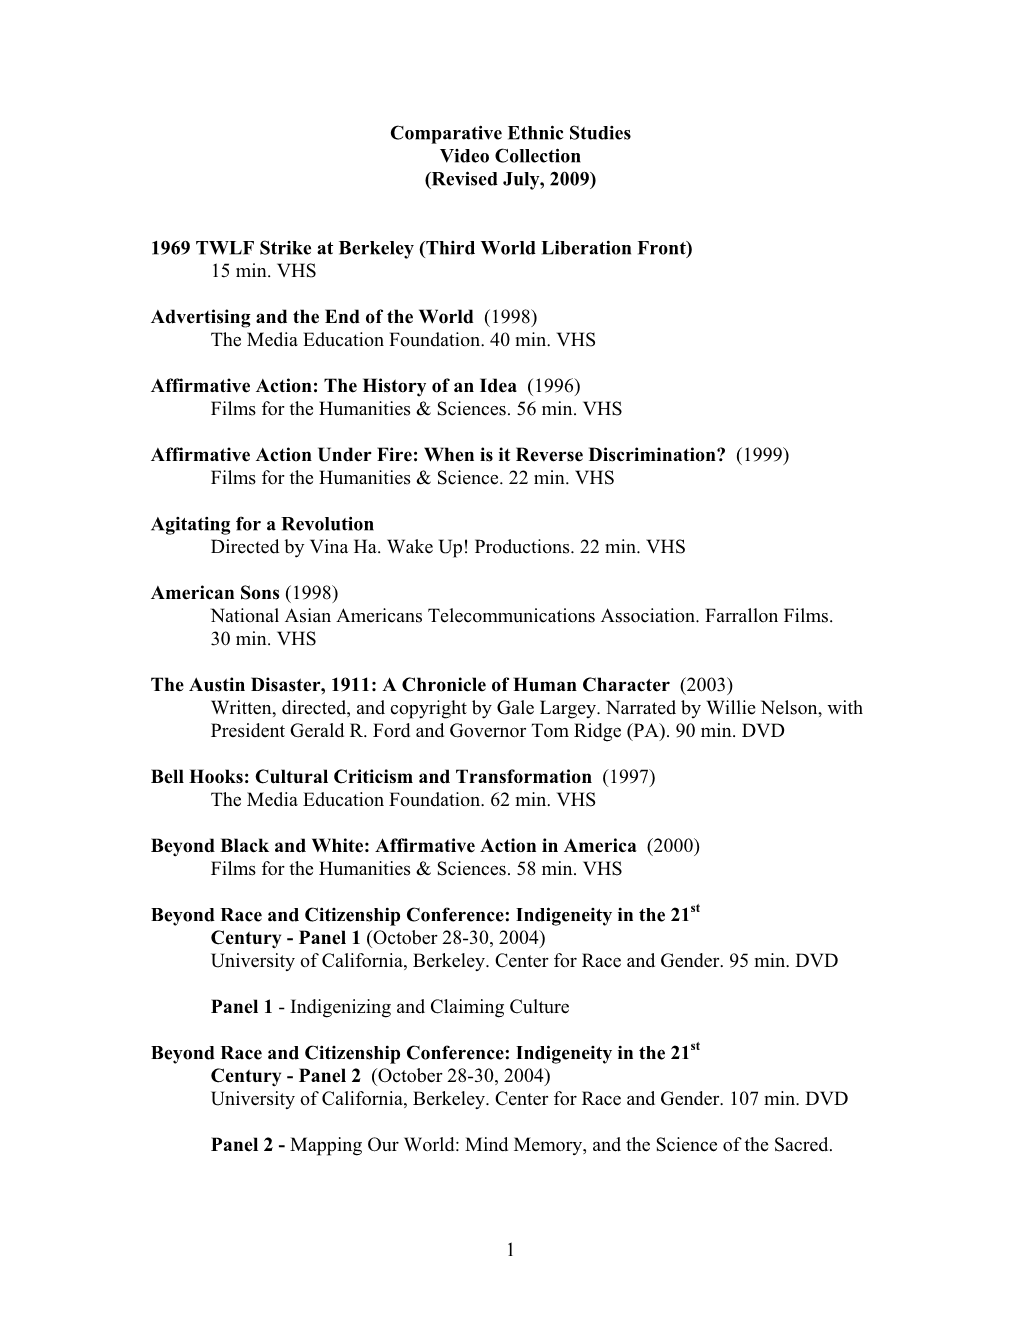 Comparative Ethnic Studies Video Collection (Revised July, 2009)